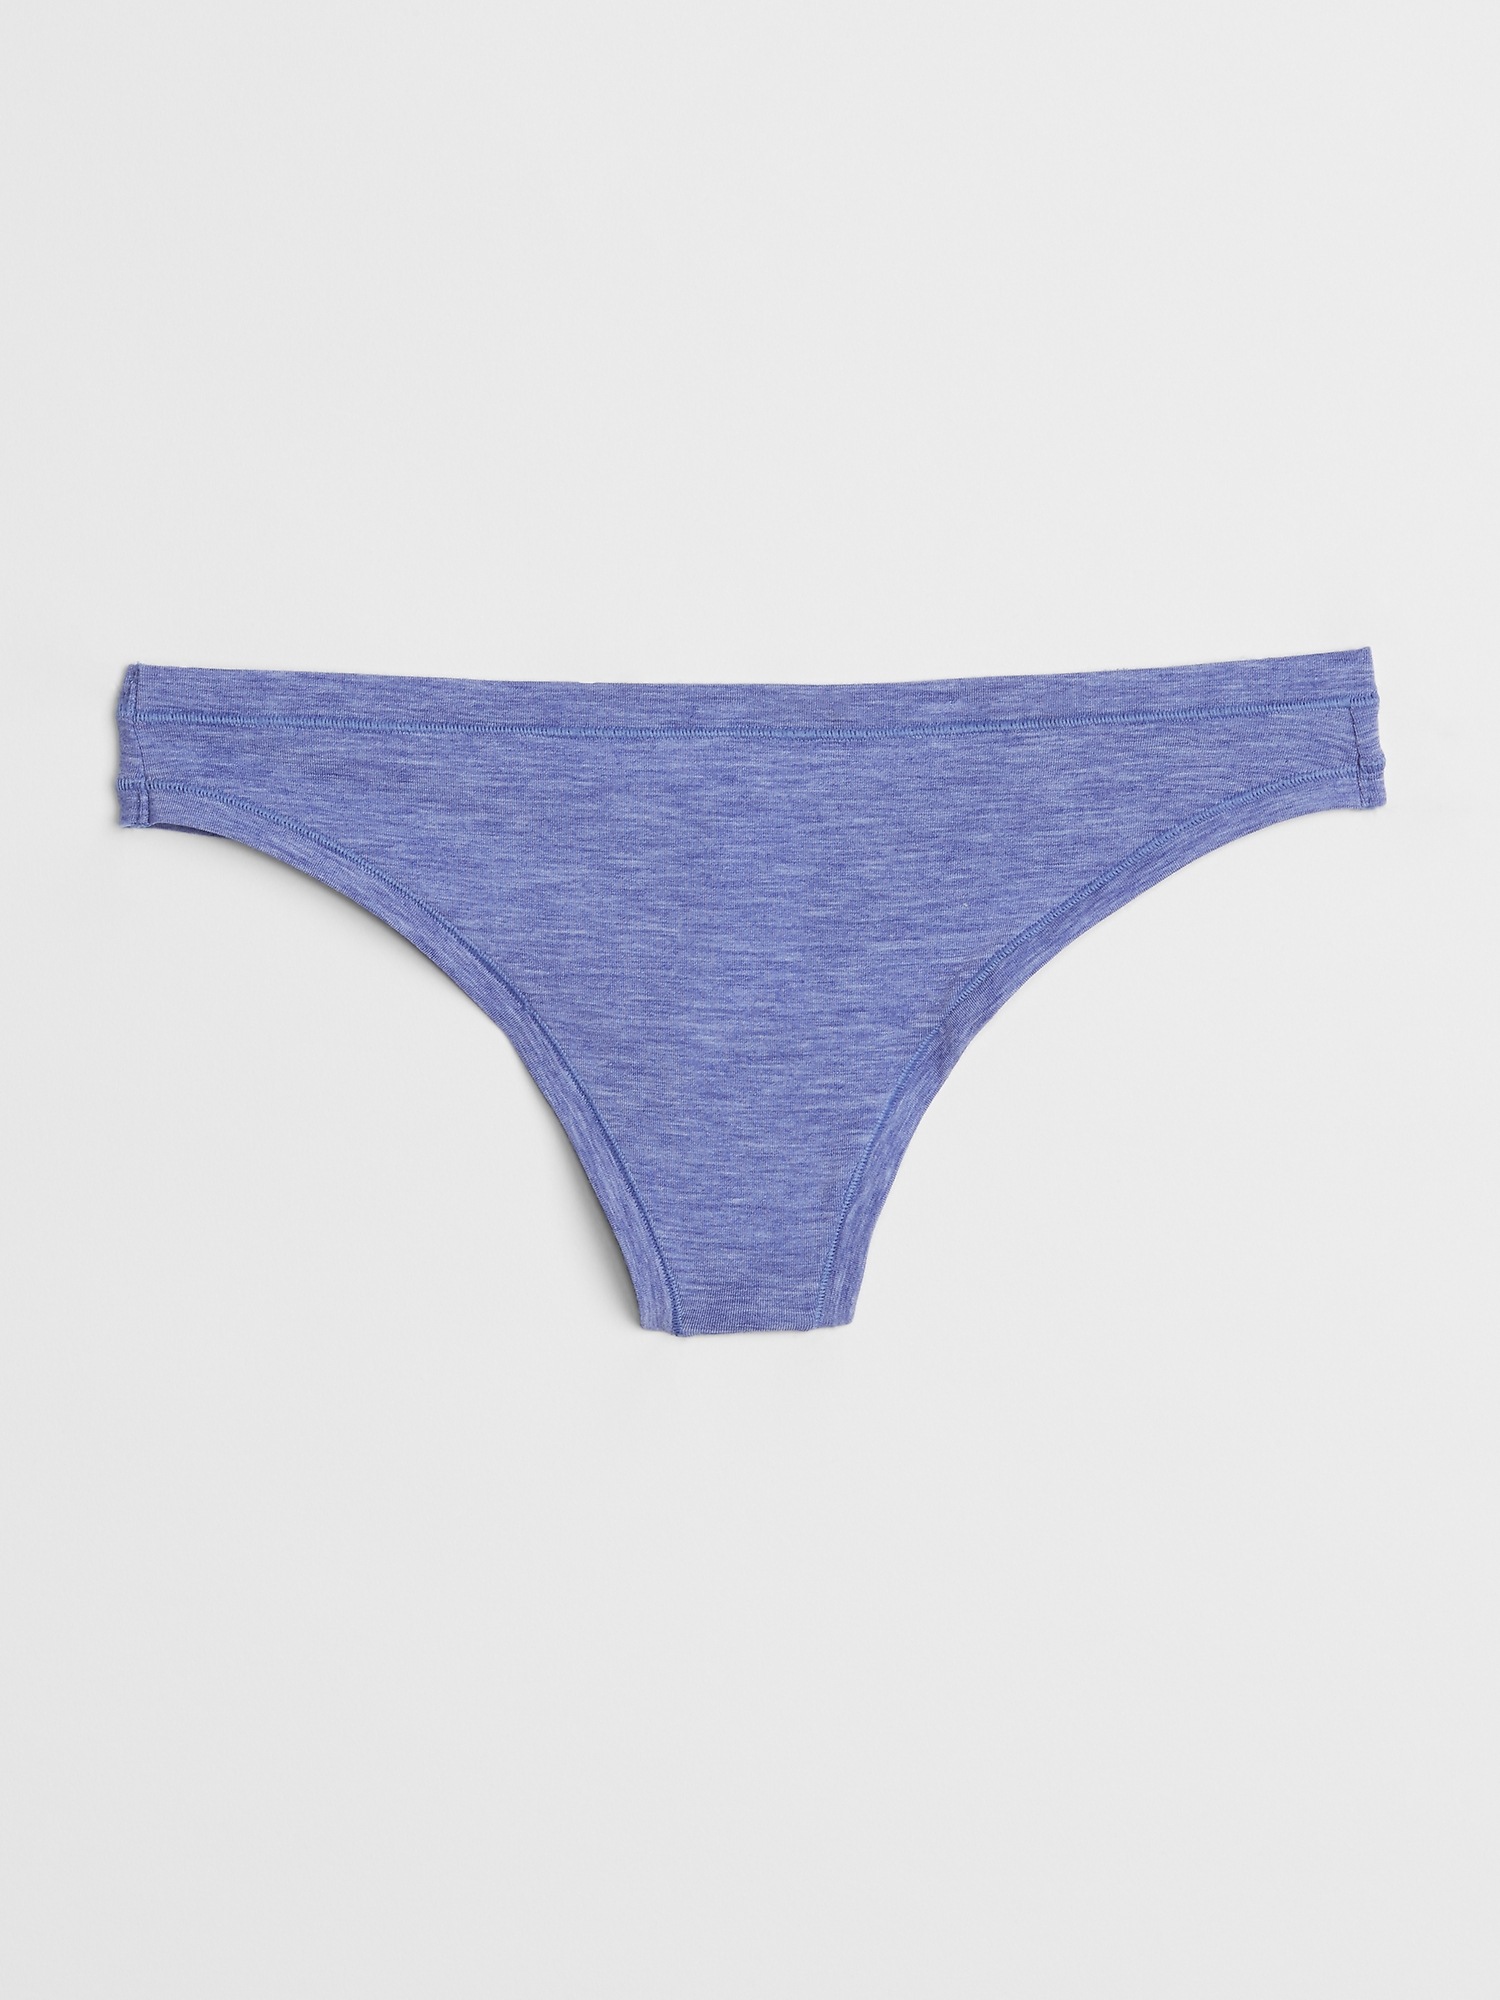 NWT LOVE By GAP Panties Body Breathe Thong Size XS Blue Smooth